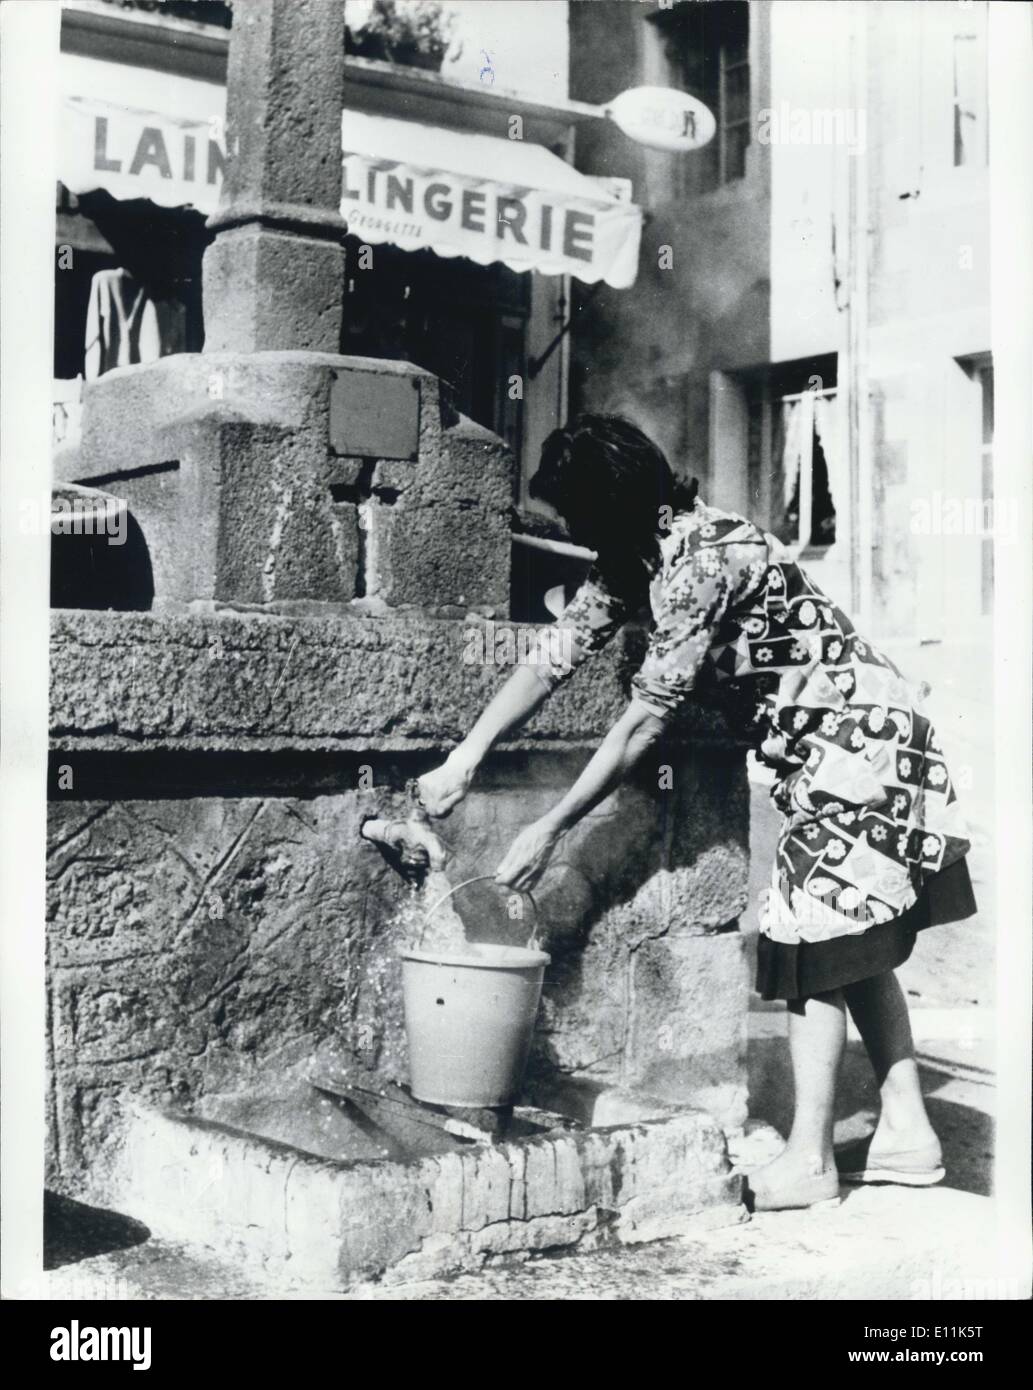 Sep. 01, 1978 - Endless Hot Water - and no Bills for the Lucky Householders of Chaudes-Aigues: With costs for heating domestic water constantly rising how lucky are the people who live in the small French town of Chaude-Aigues. They have had their own endless supply of hot water on tap since Roman tines. The source of the hot water is a well called Le Par which has a high pressure supply with a temperature of 82 degrees Celcius on the surface Stock Photo